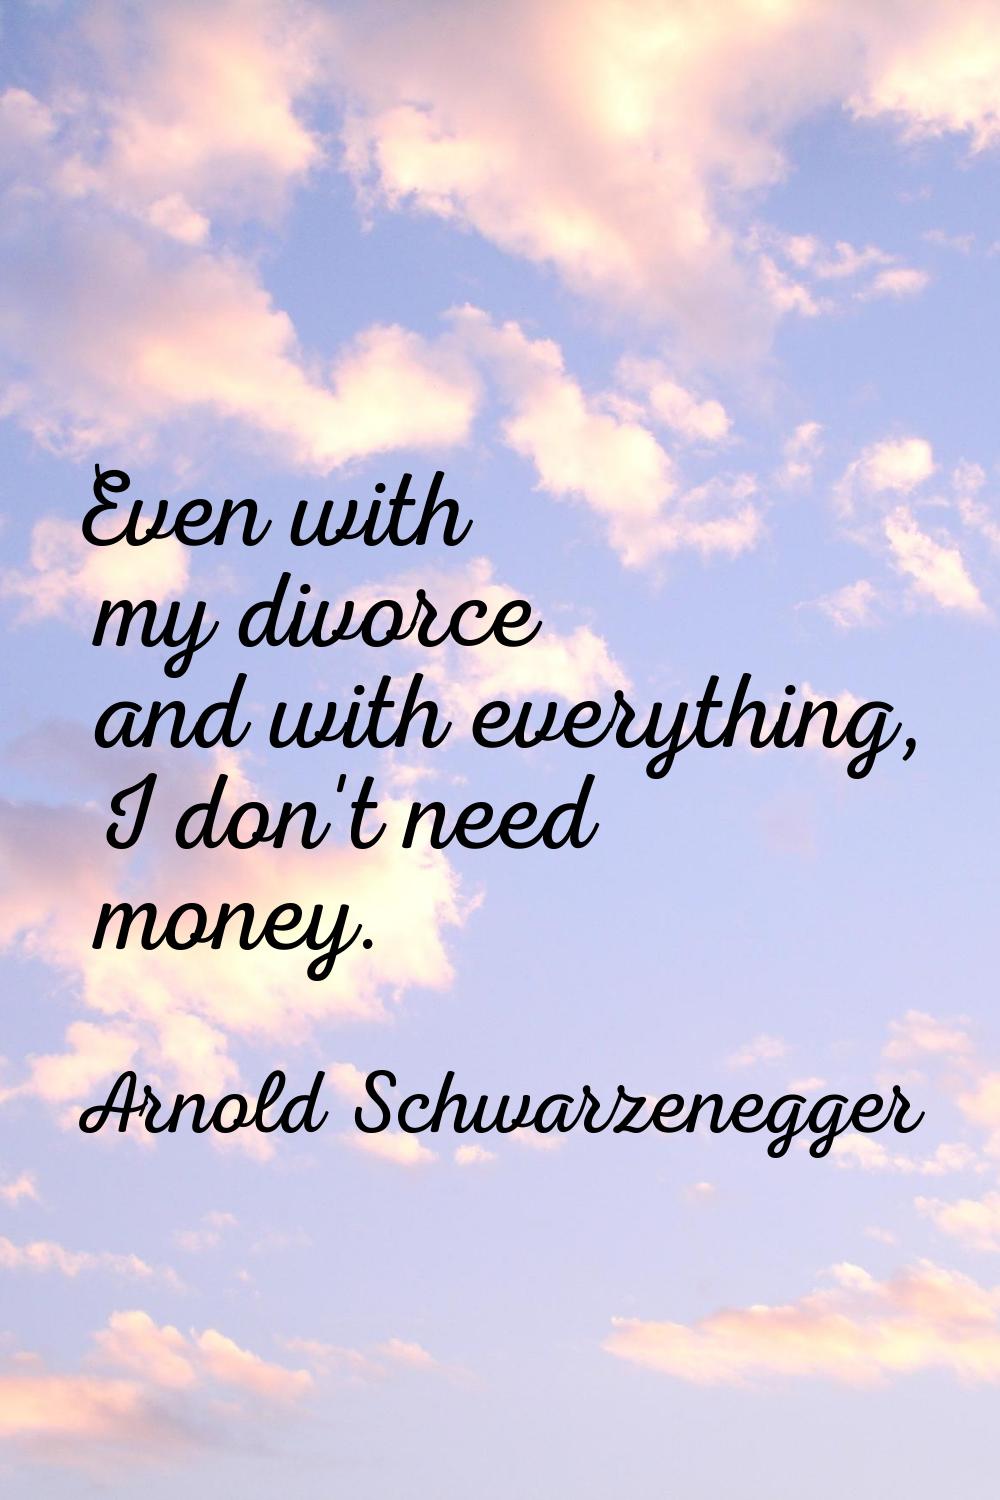 Even with my divorce and with everything, I don't need money.